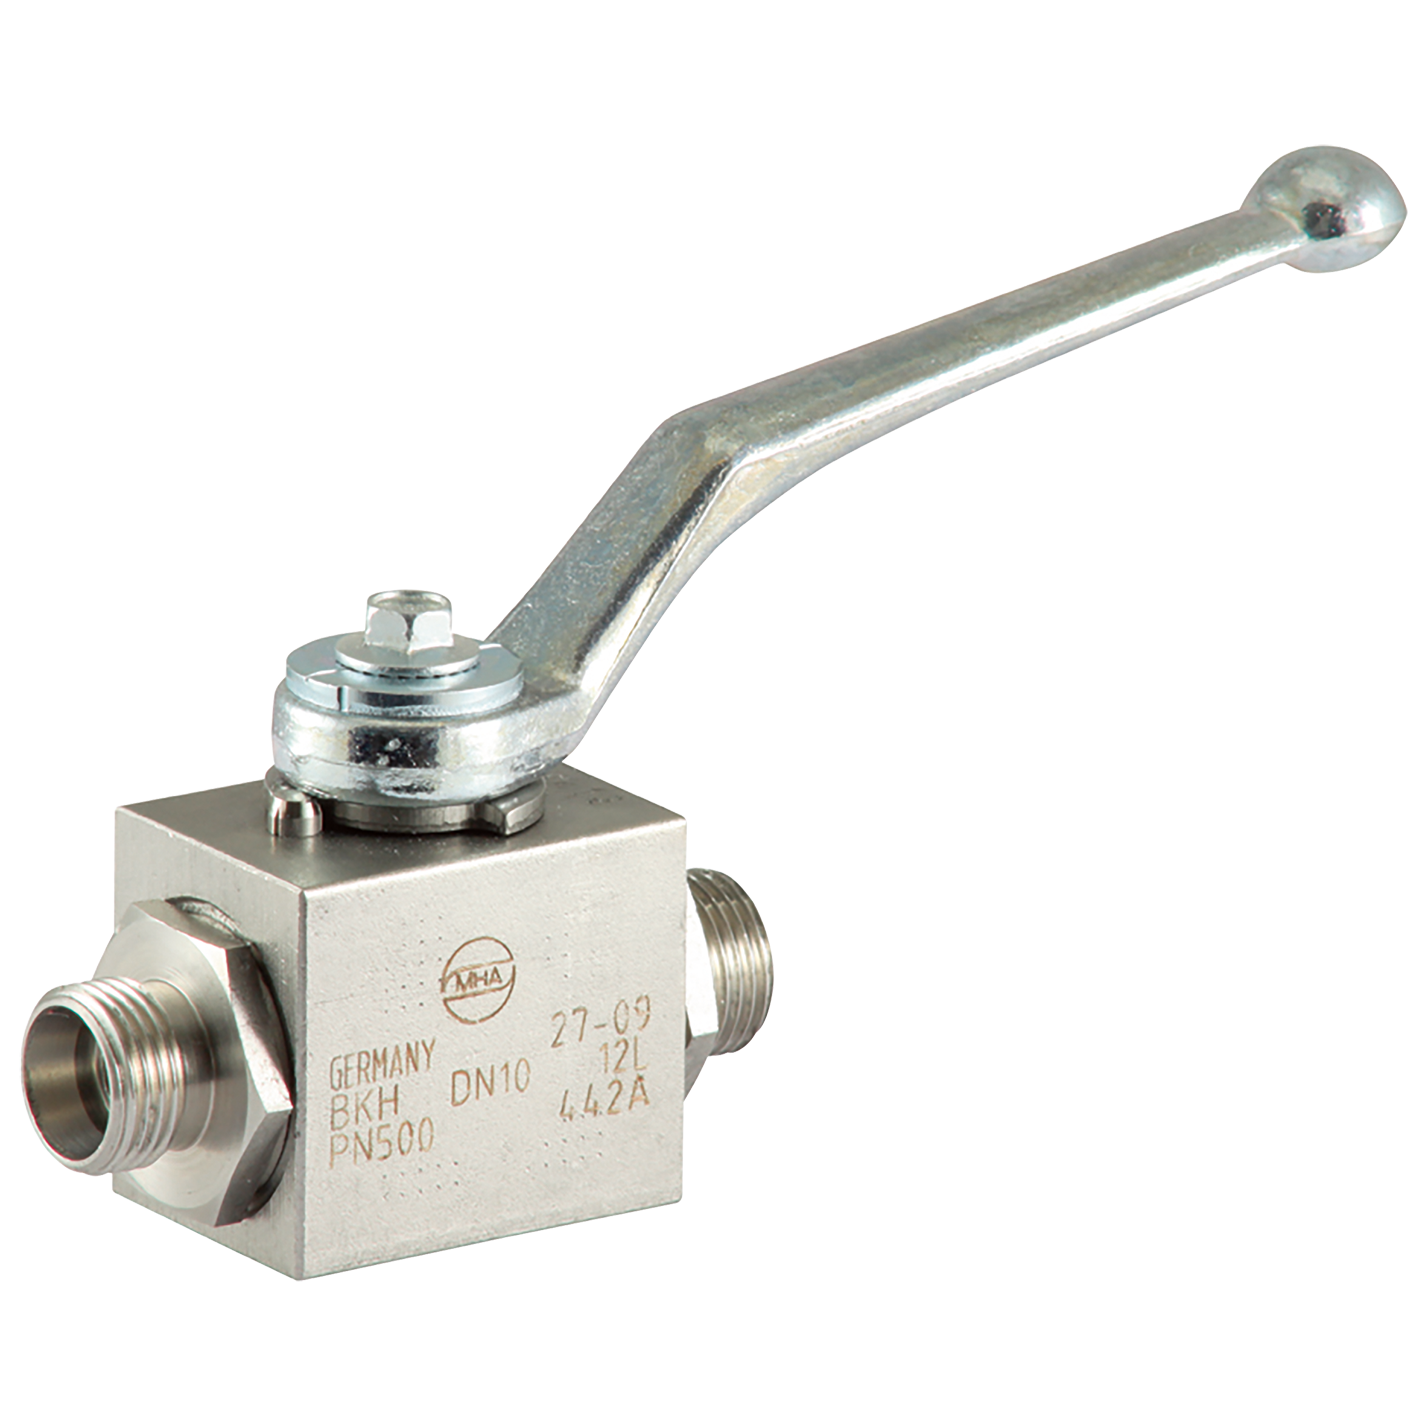 UK Suppliers of Industrial Valves For Hydraulics